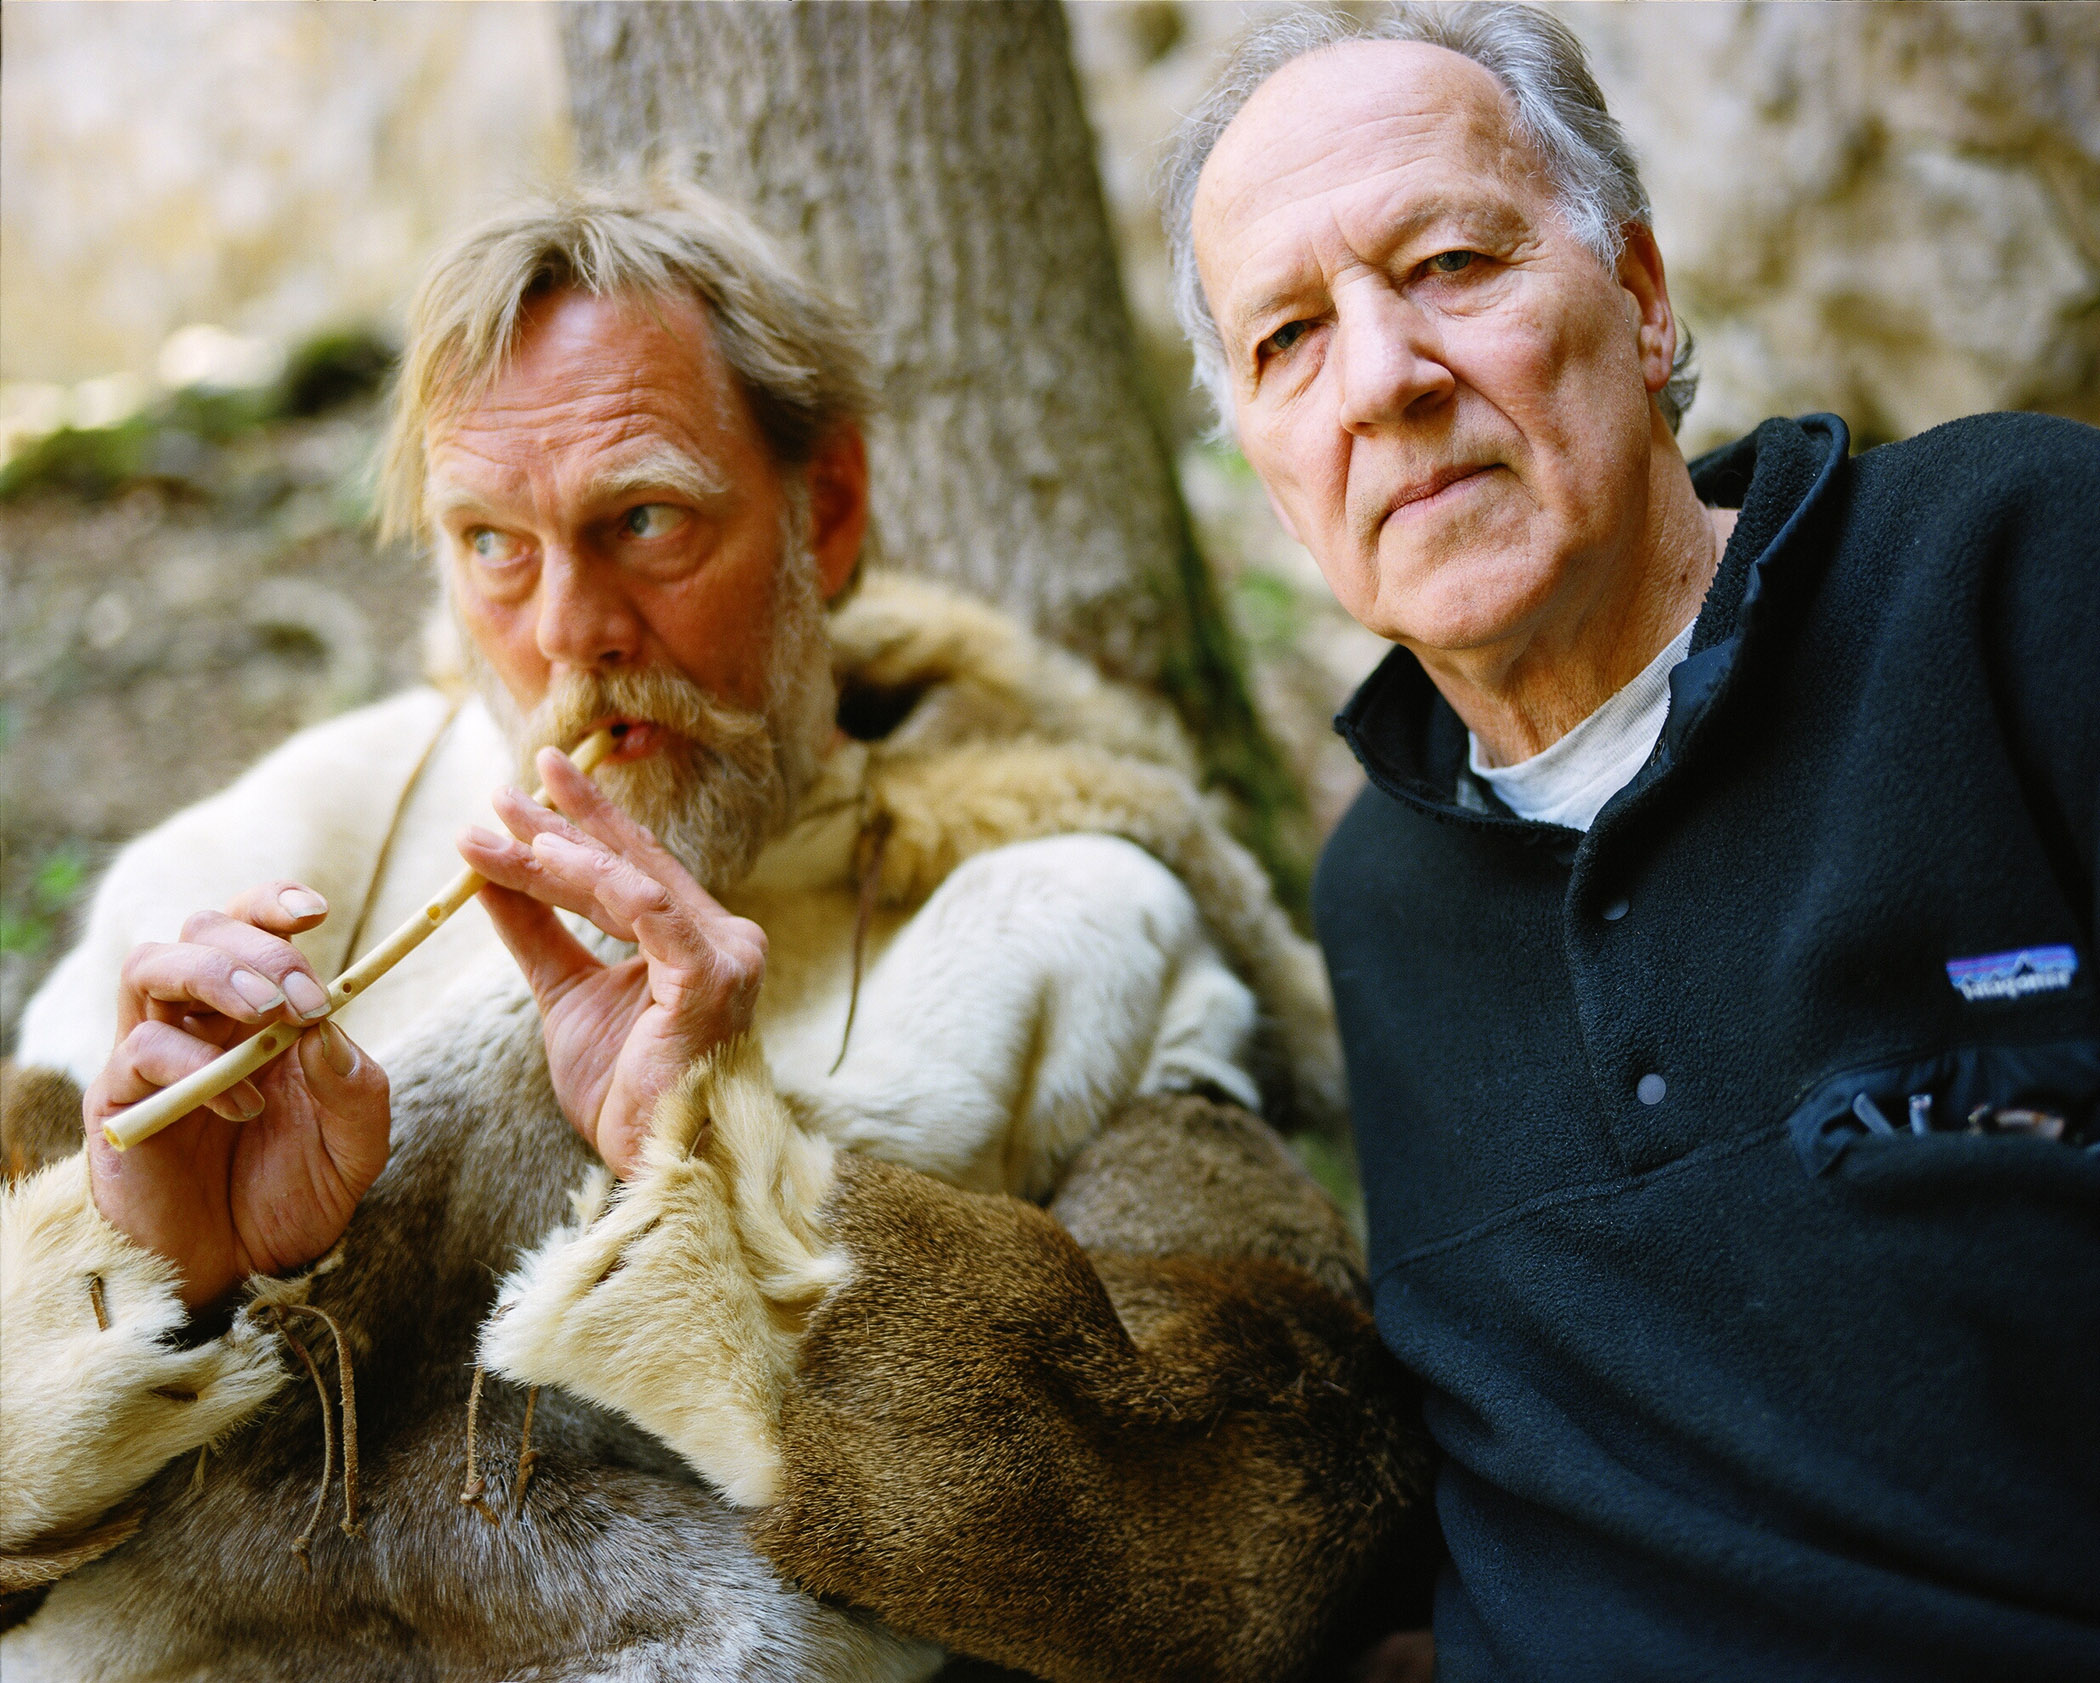 CAVE OF FORGOTTEN DREAMS, from left: W. Hein, director Werner Herzog, on set, 2010. Ph: Mark Valesel